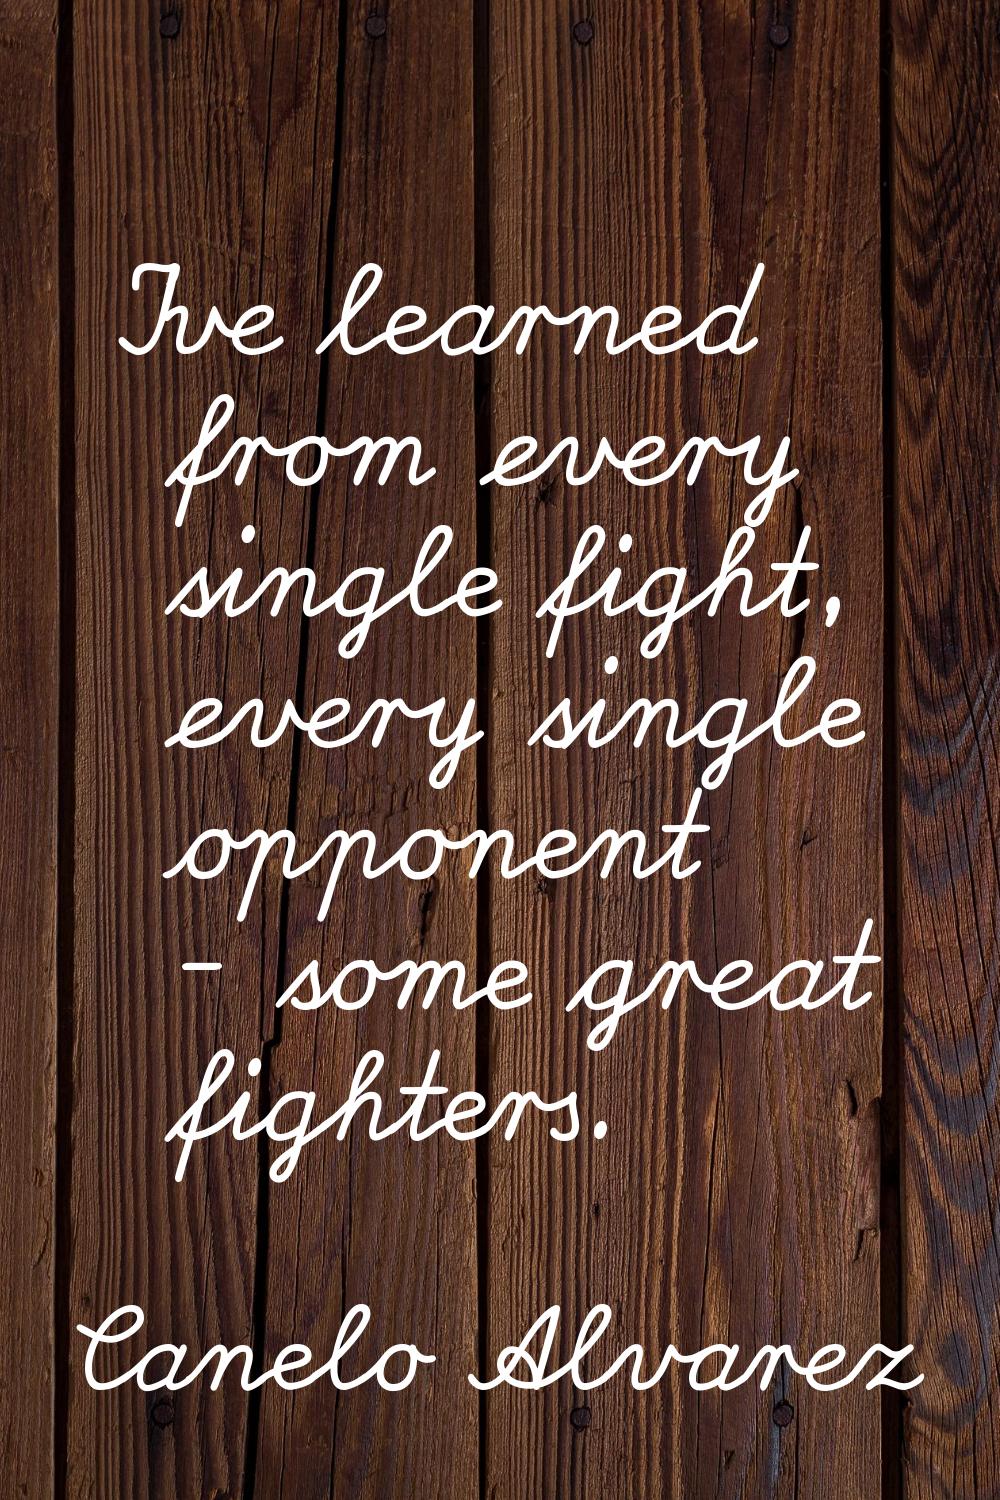 I've learned from every single fight, every single opponent - some great fighters.